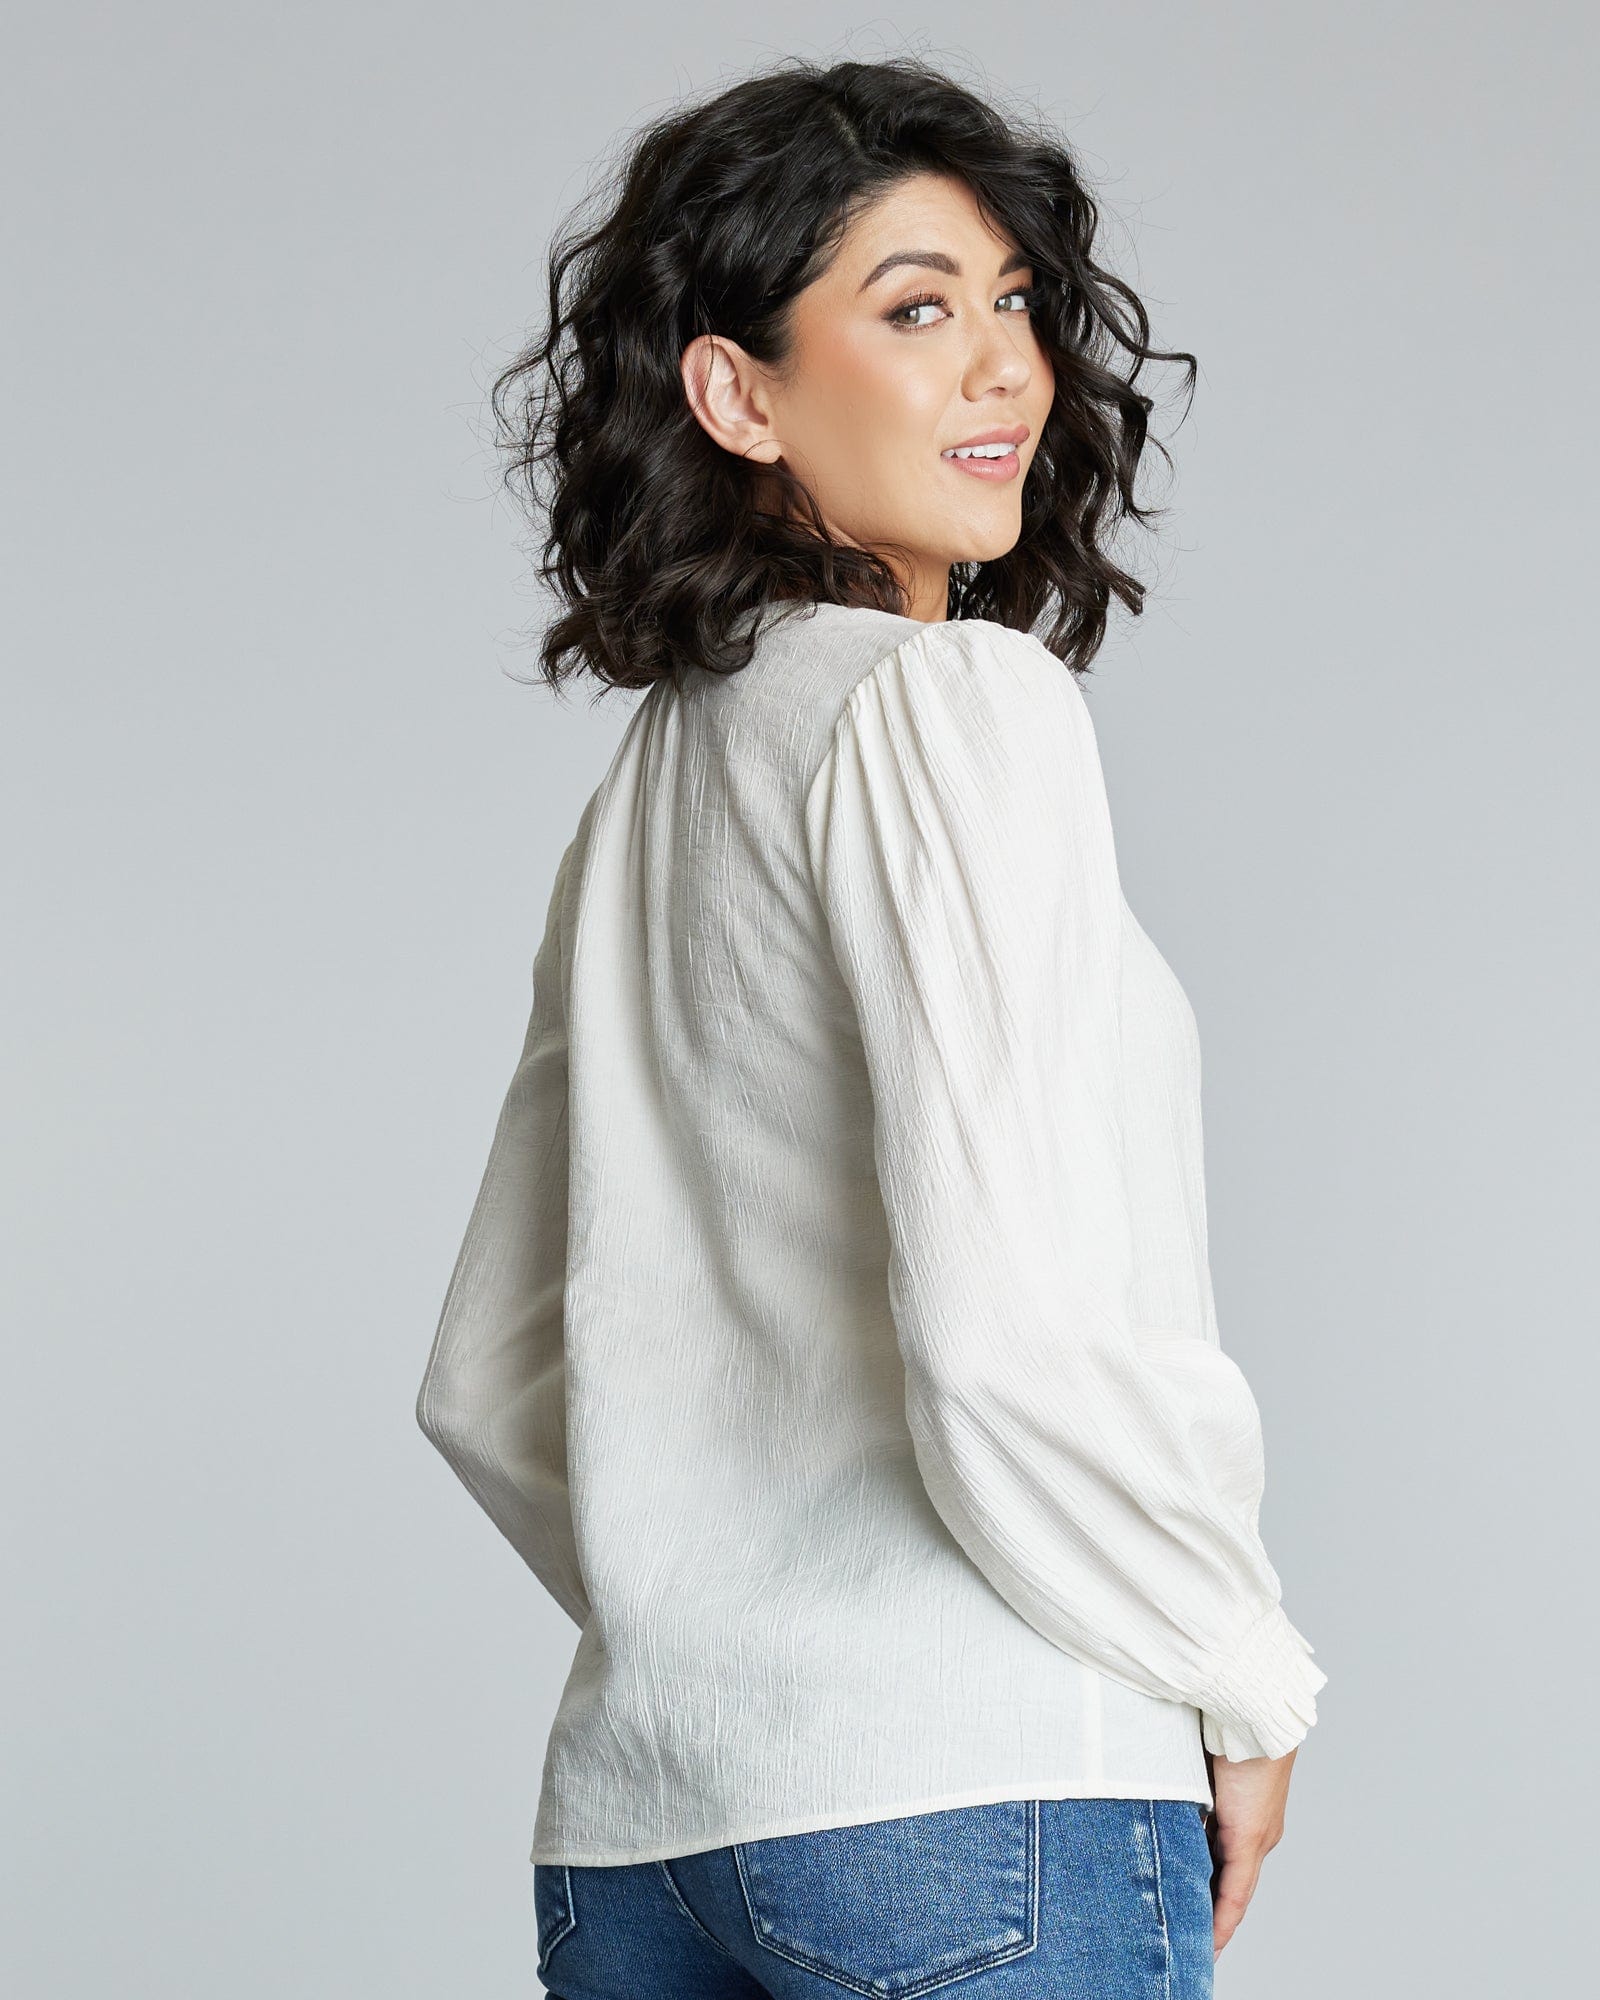 Woman in a long sleeve, white blouse